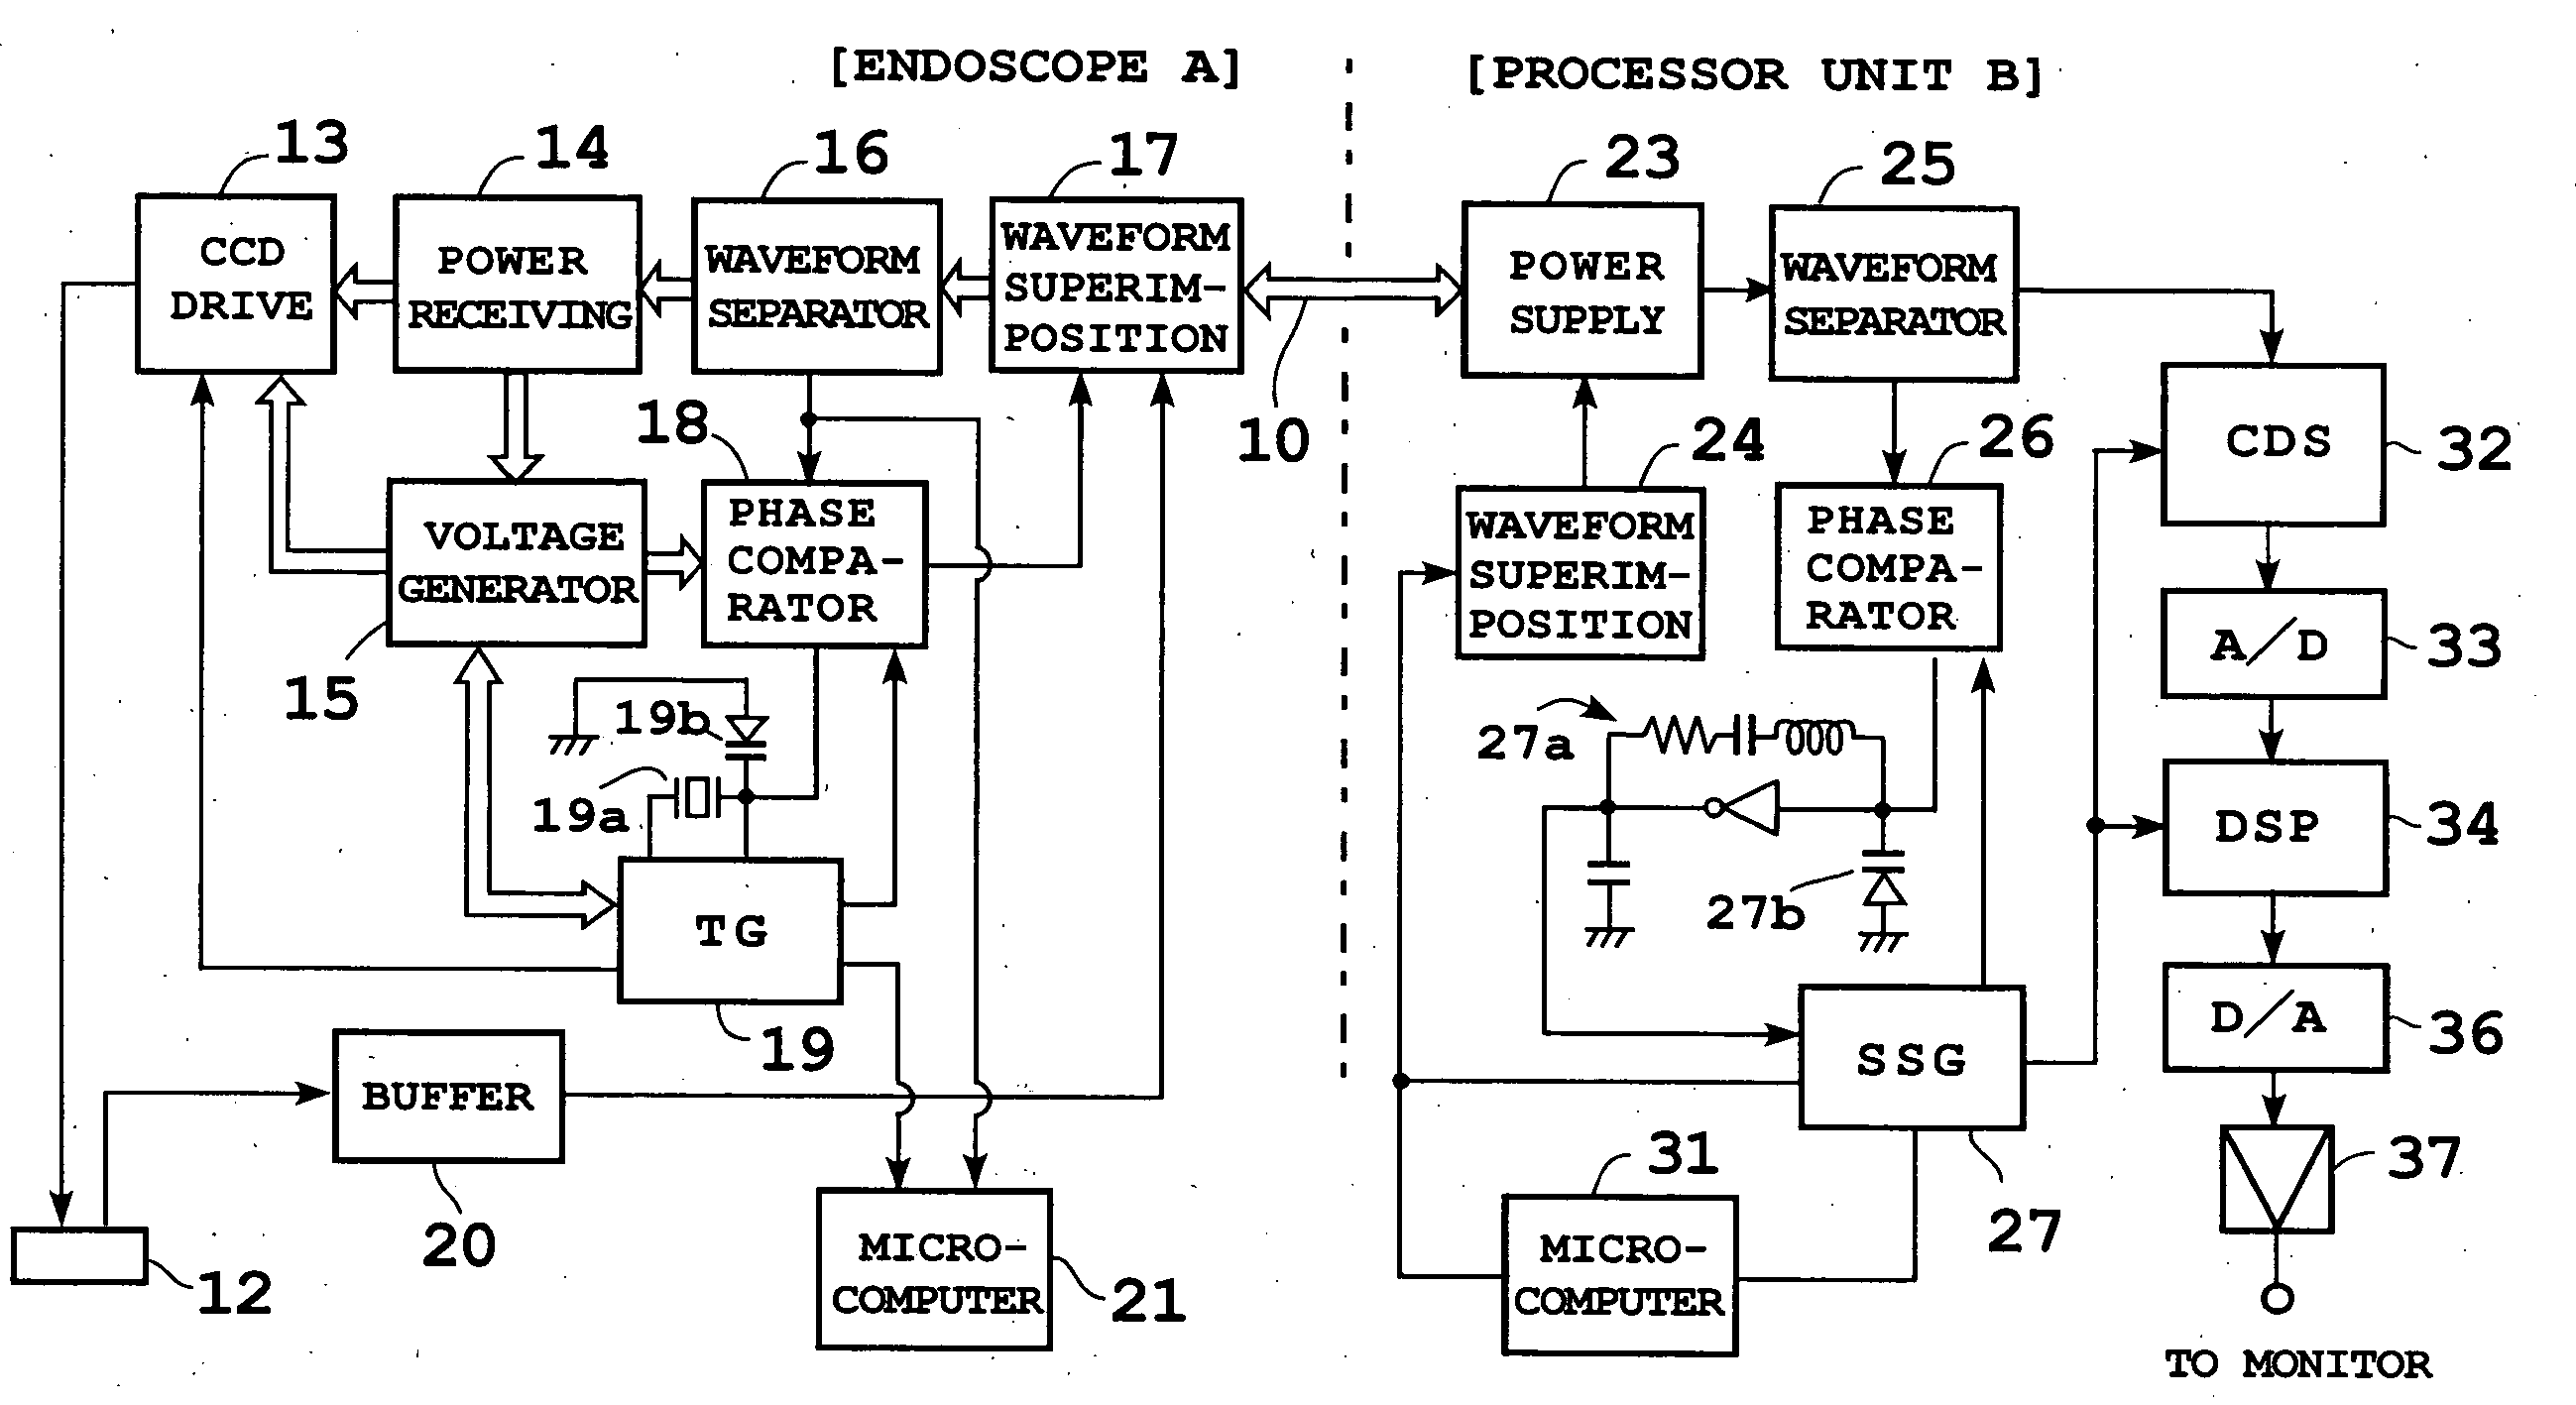 Electronic endoscope apparatus which superimposes signals on power supply